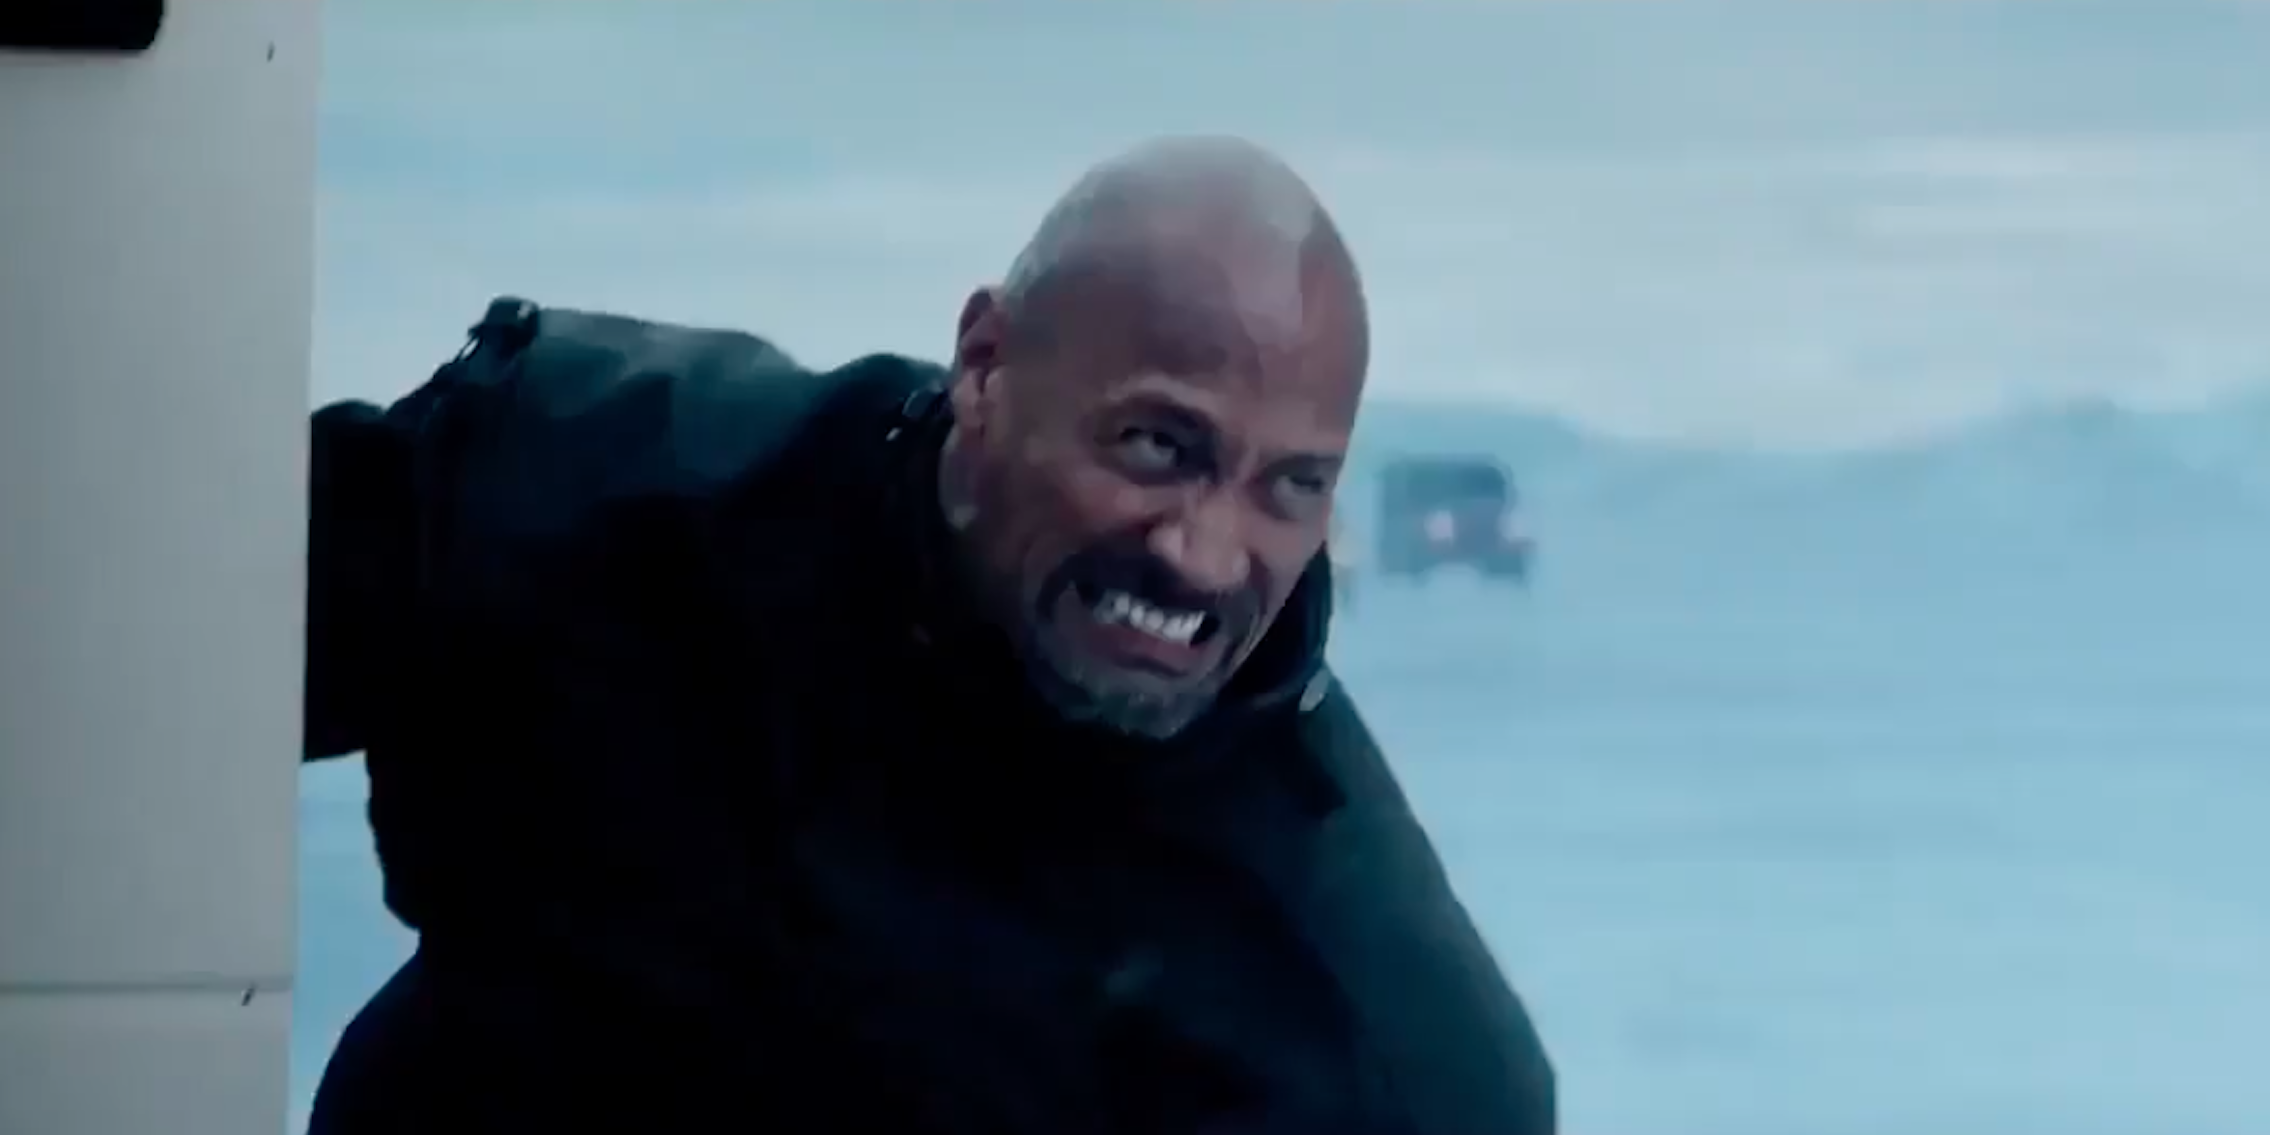 fate of the furious 8: second trailer rock catches torpedo in hand